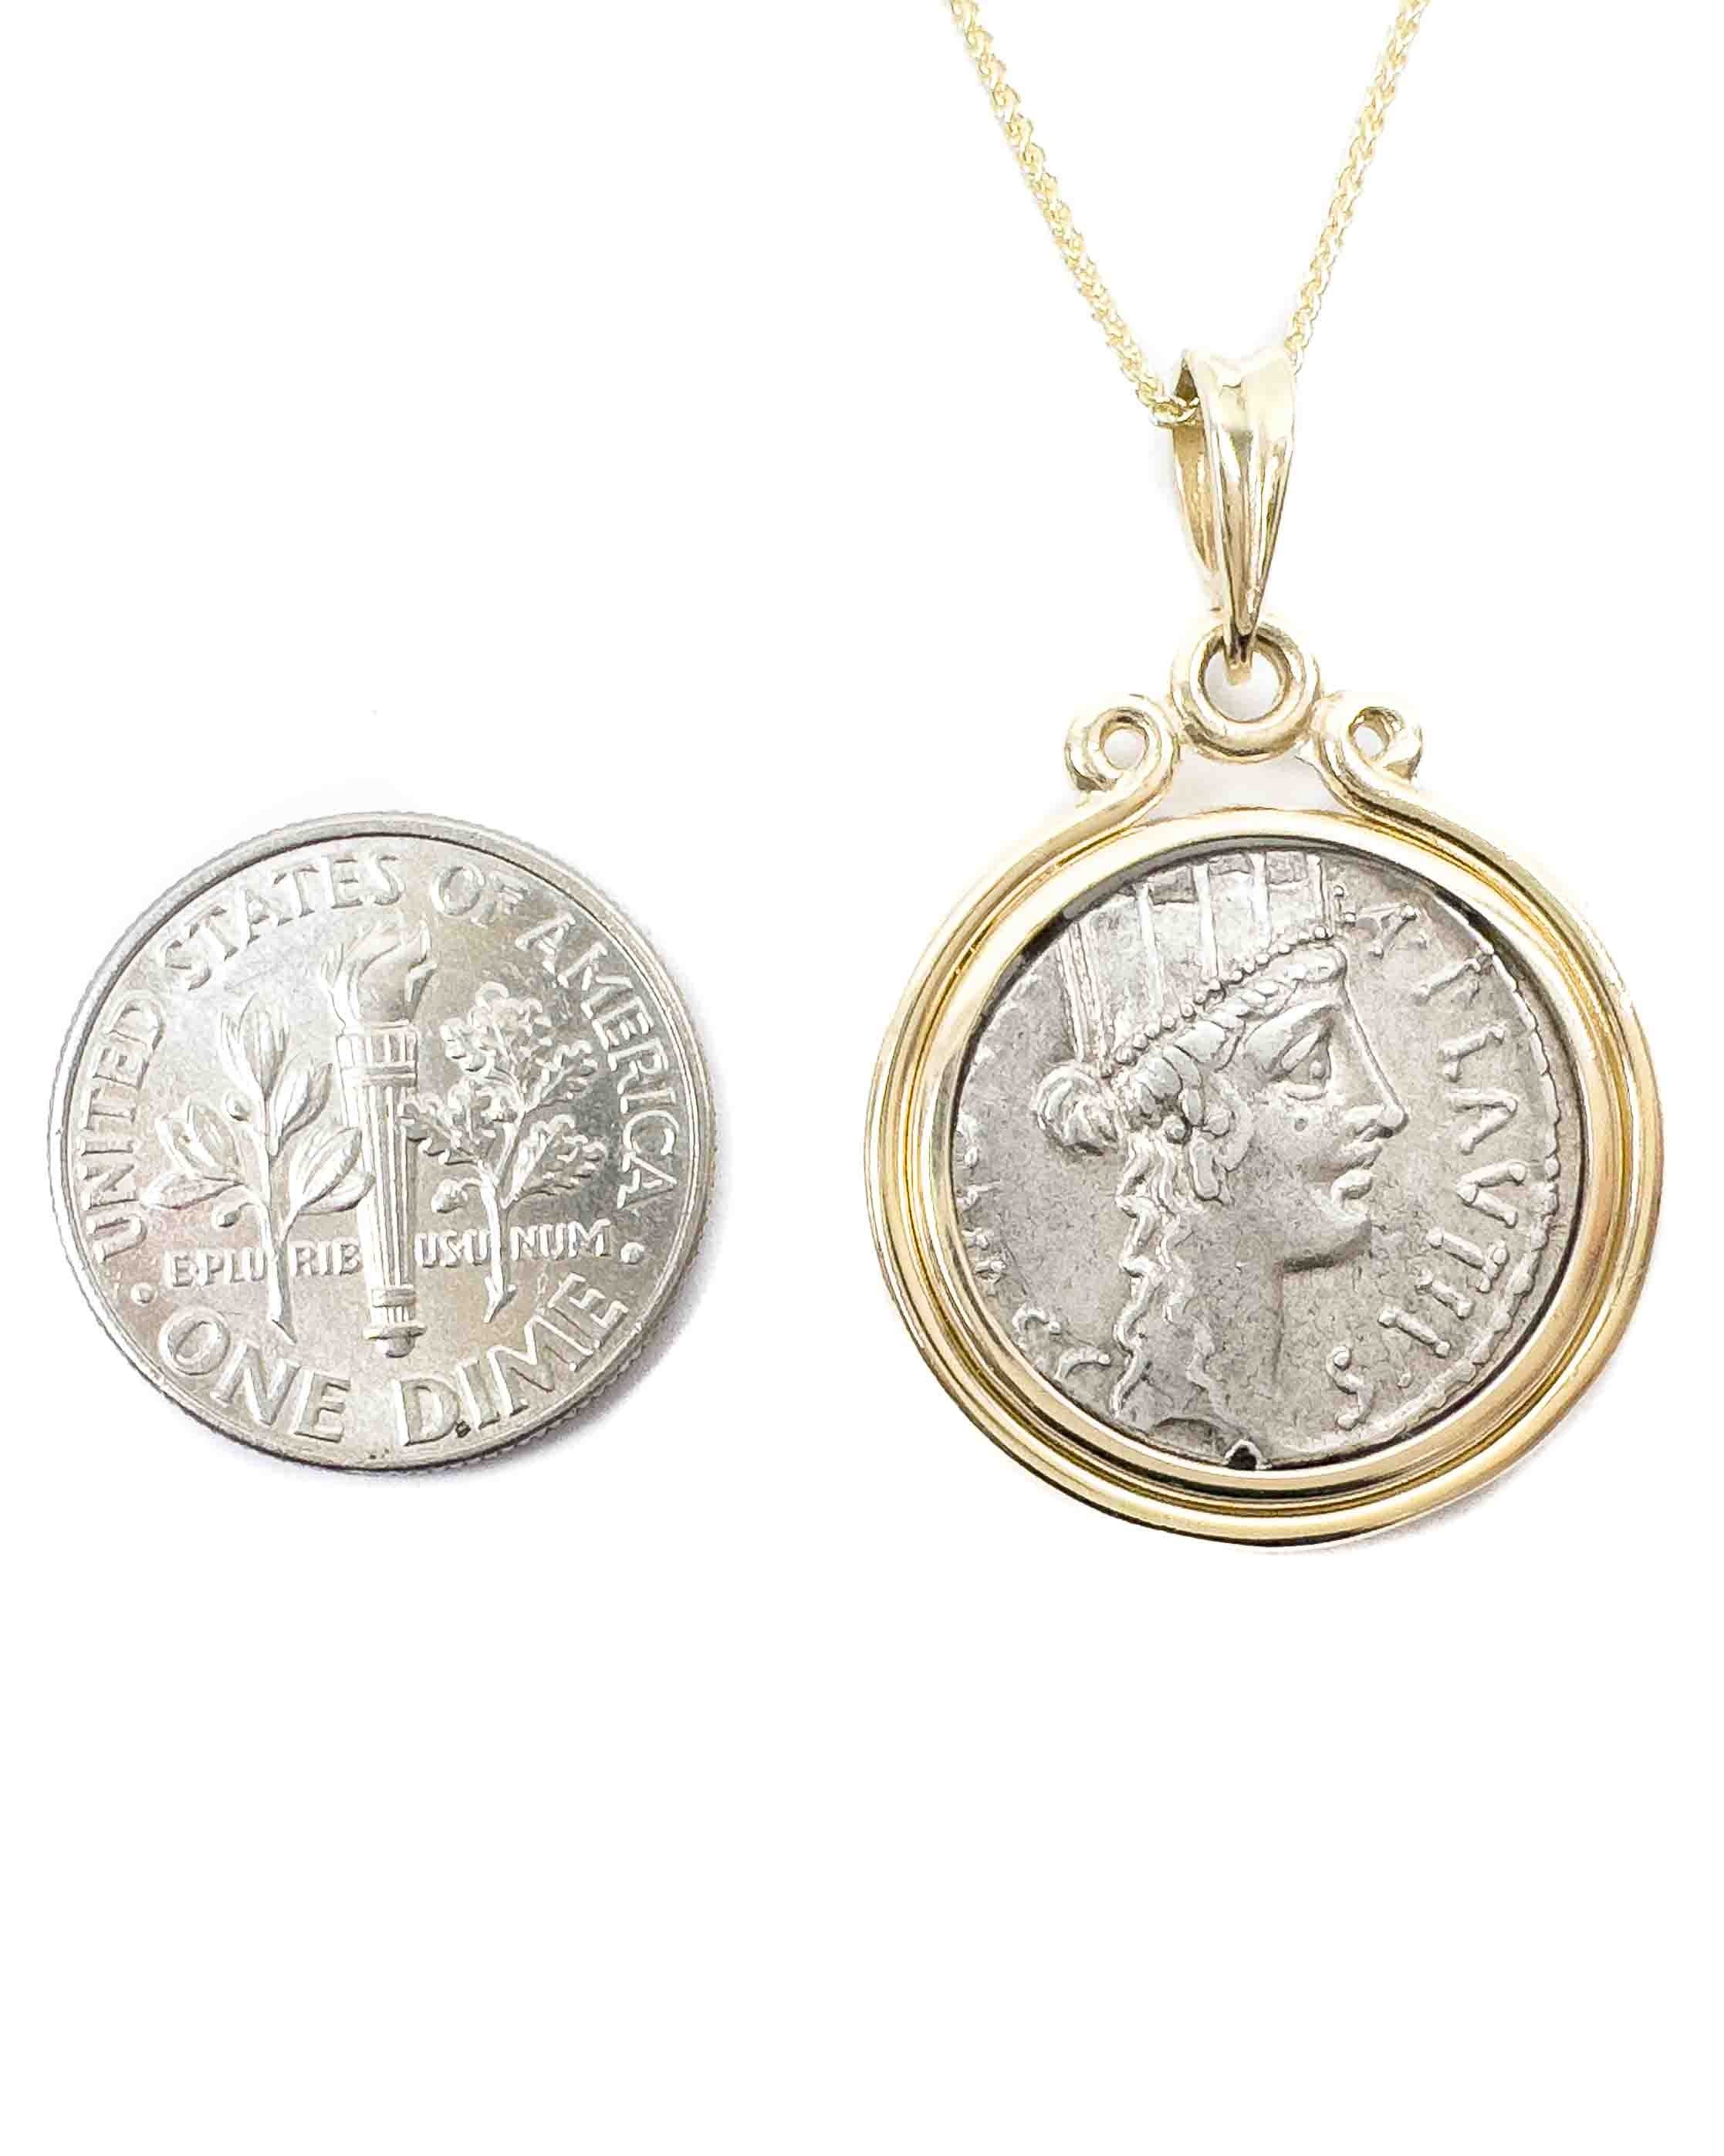 Amazon.com: Roy Rose Jewelry Gold Coin Bezel Pendant Mounting - 13mm 14mm  15mm Coin Size - Polished Rim Design - 14K Yellow Gold - Prong Set with  Bail : Clothing, Shoes & Jewelry